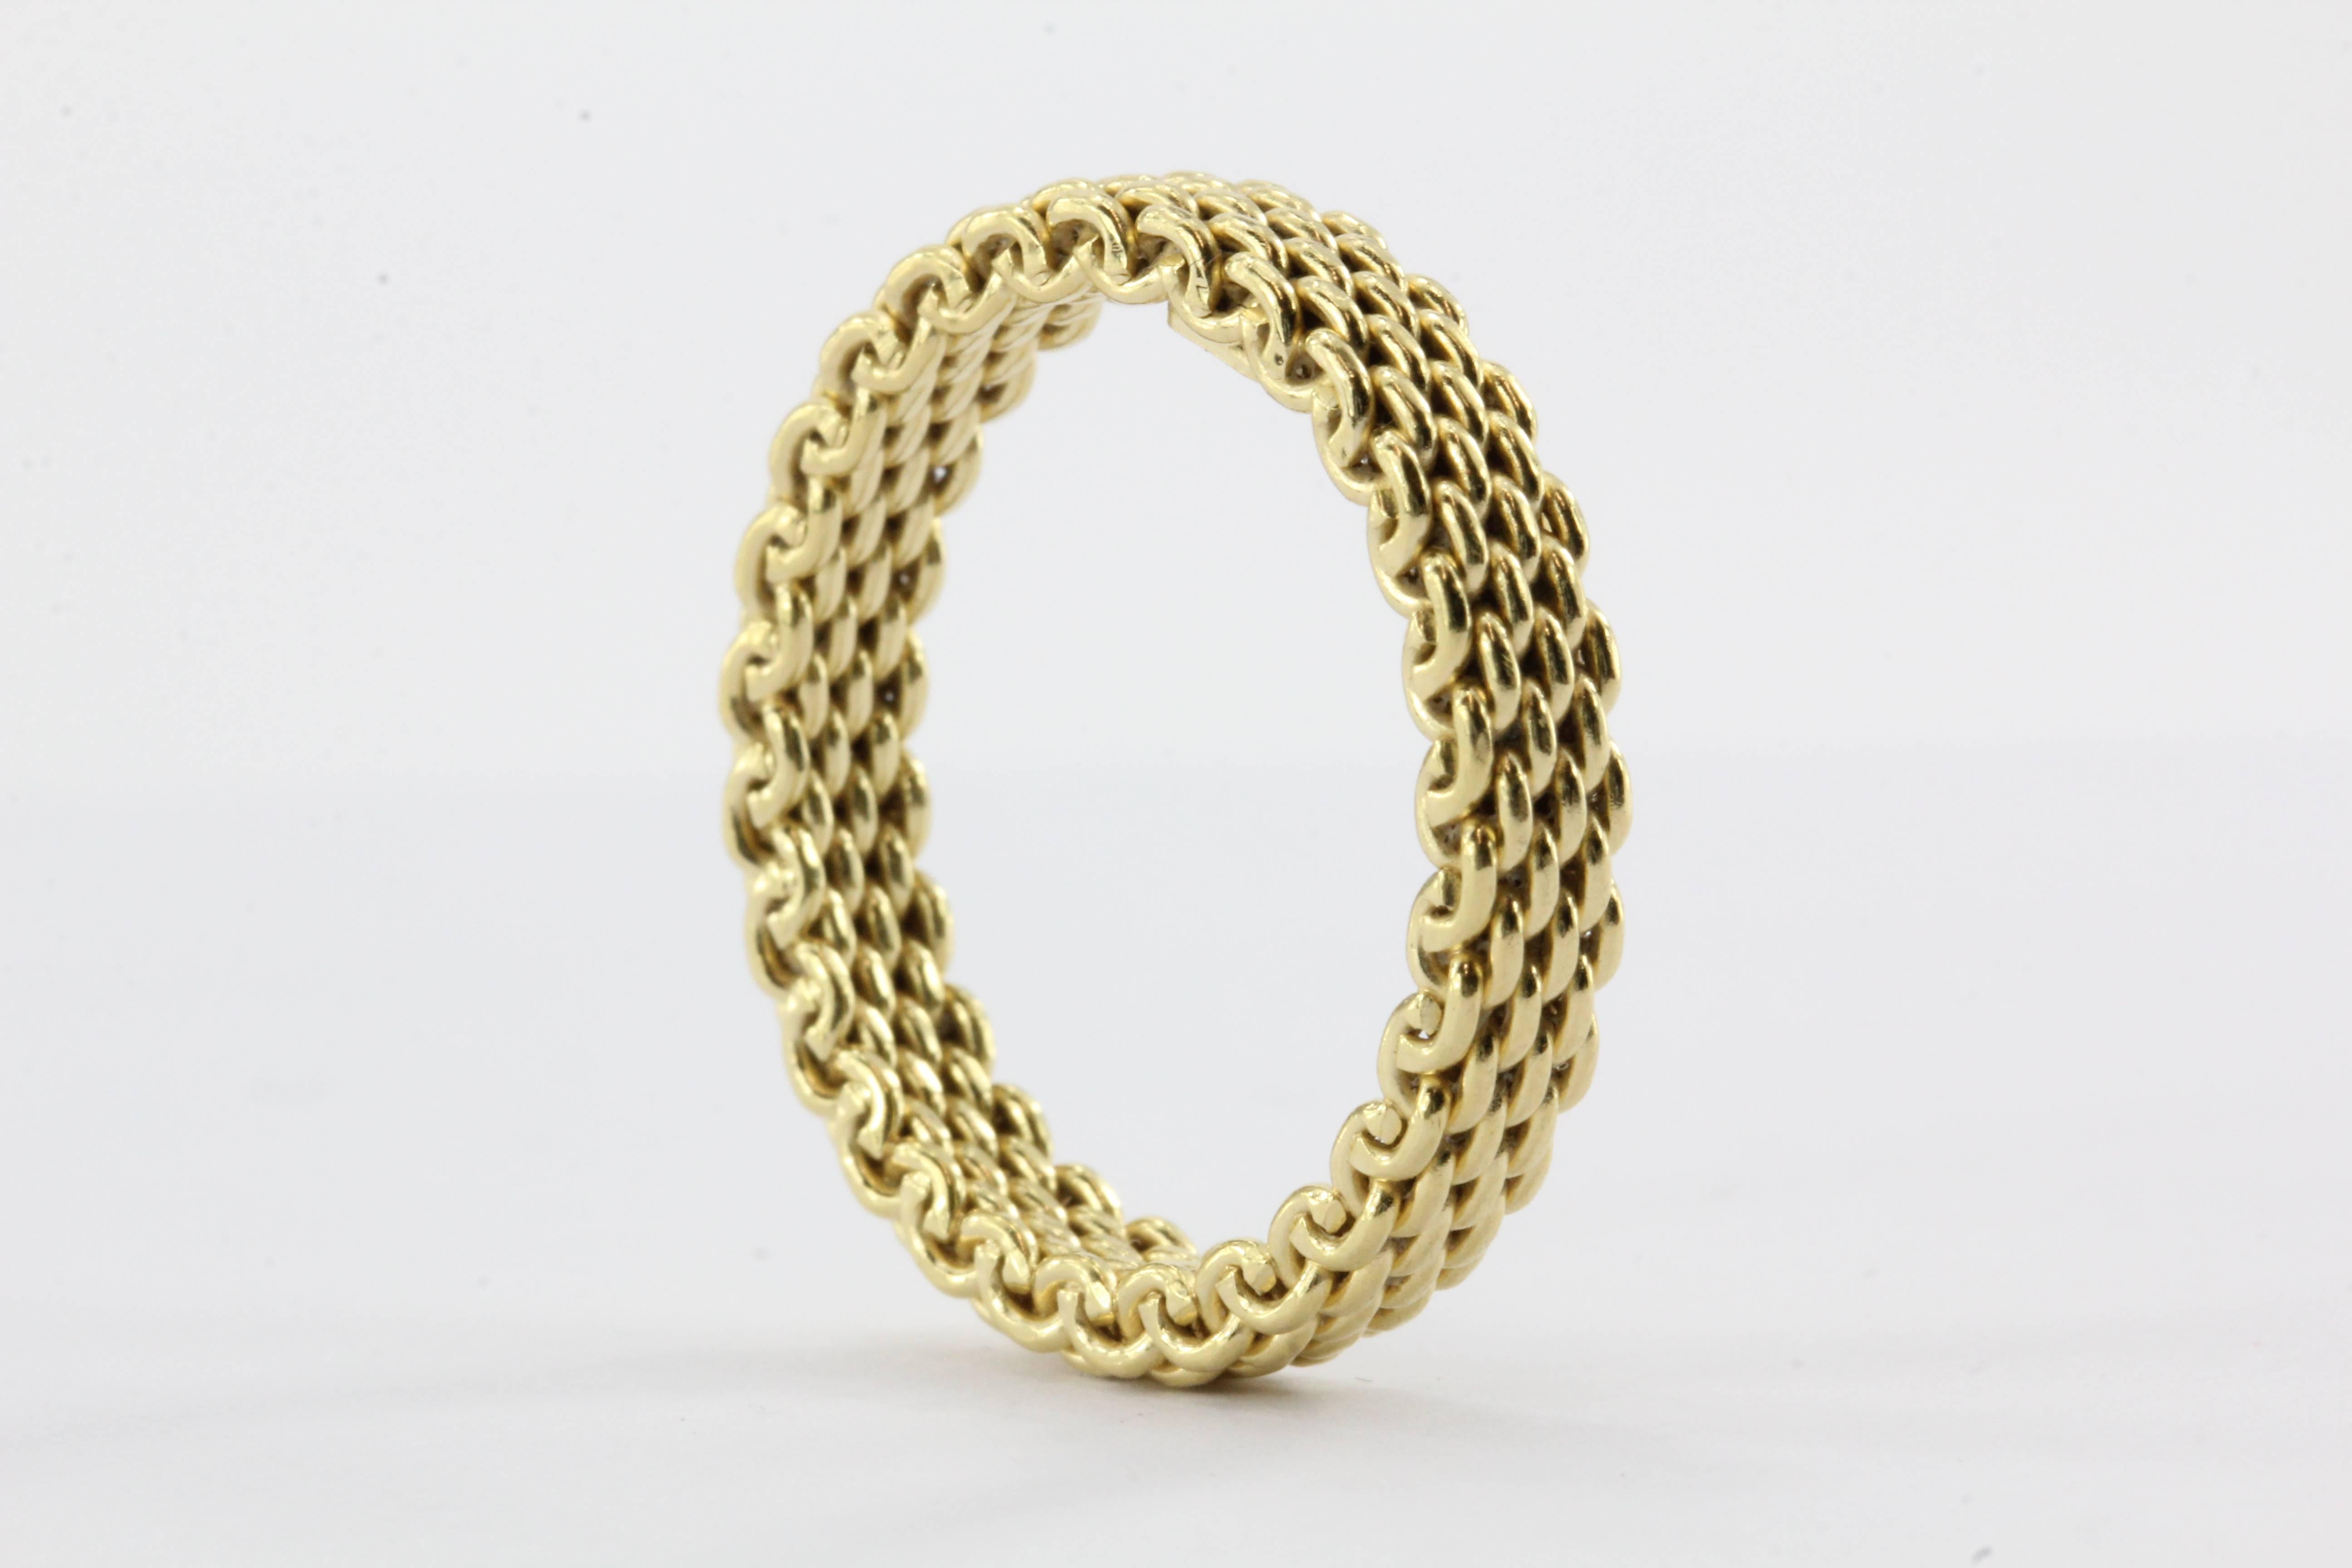 Tiffany & Co 18K Gold Somerset Mesh 3.5mm Band Ring Size 6.75. The ring is in excellent estate condition and ready to wear. It comes with its box and pouch. The ring is signed 